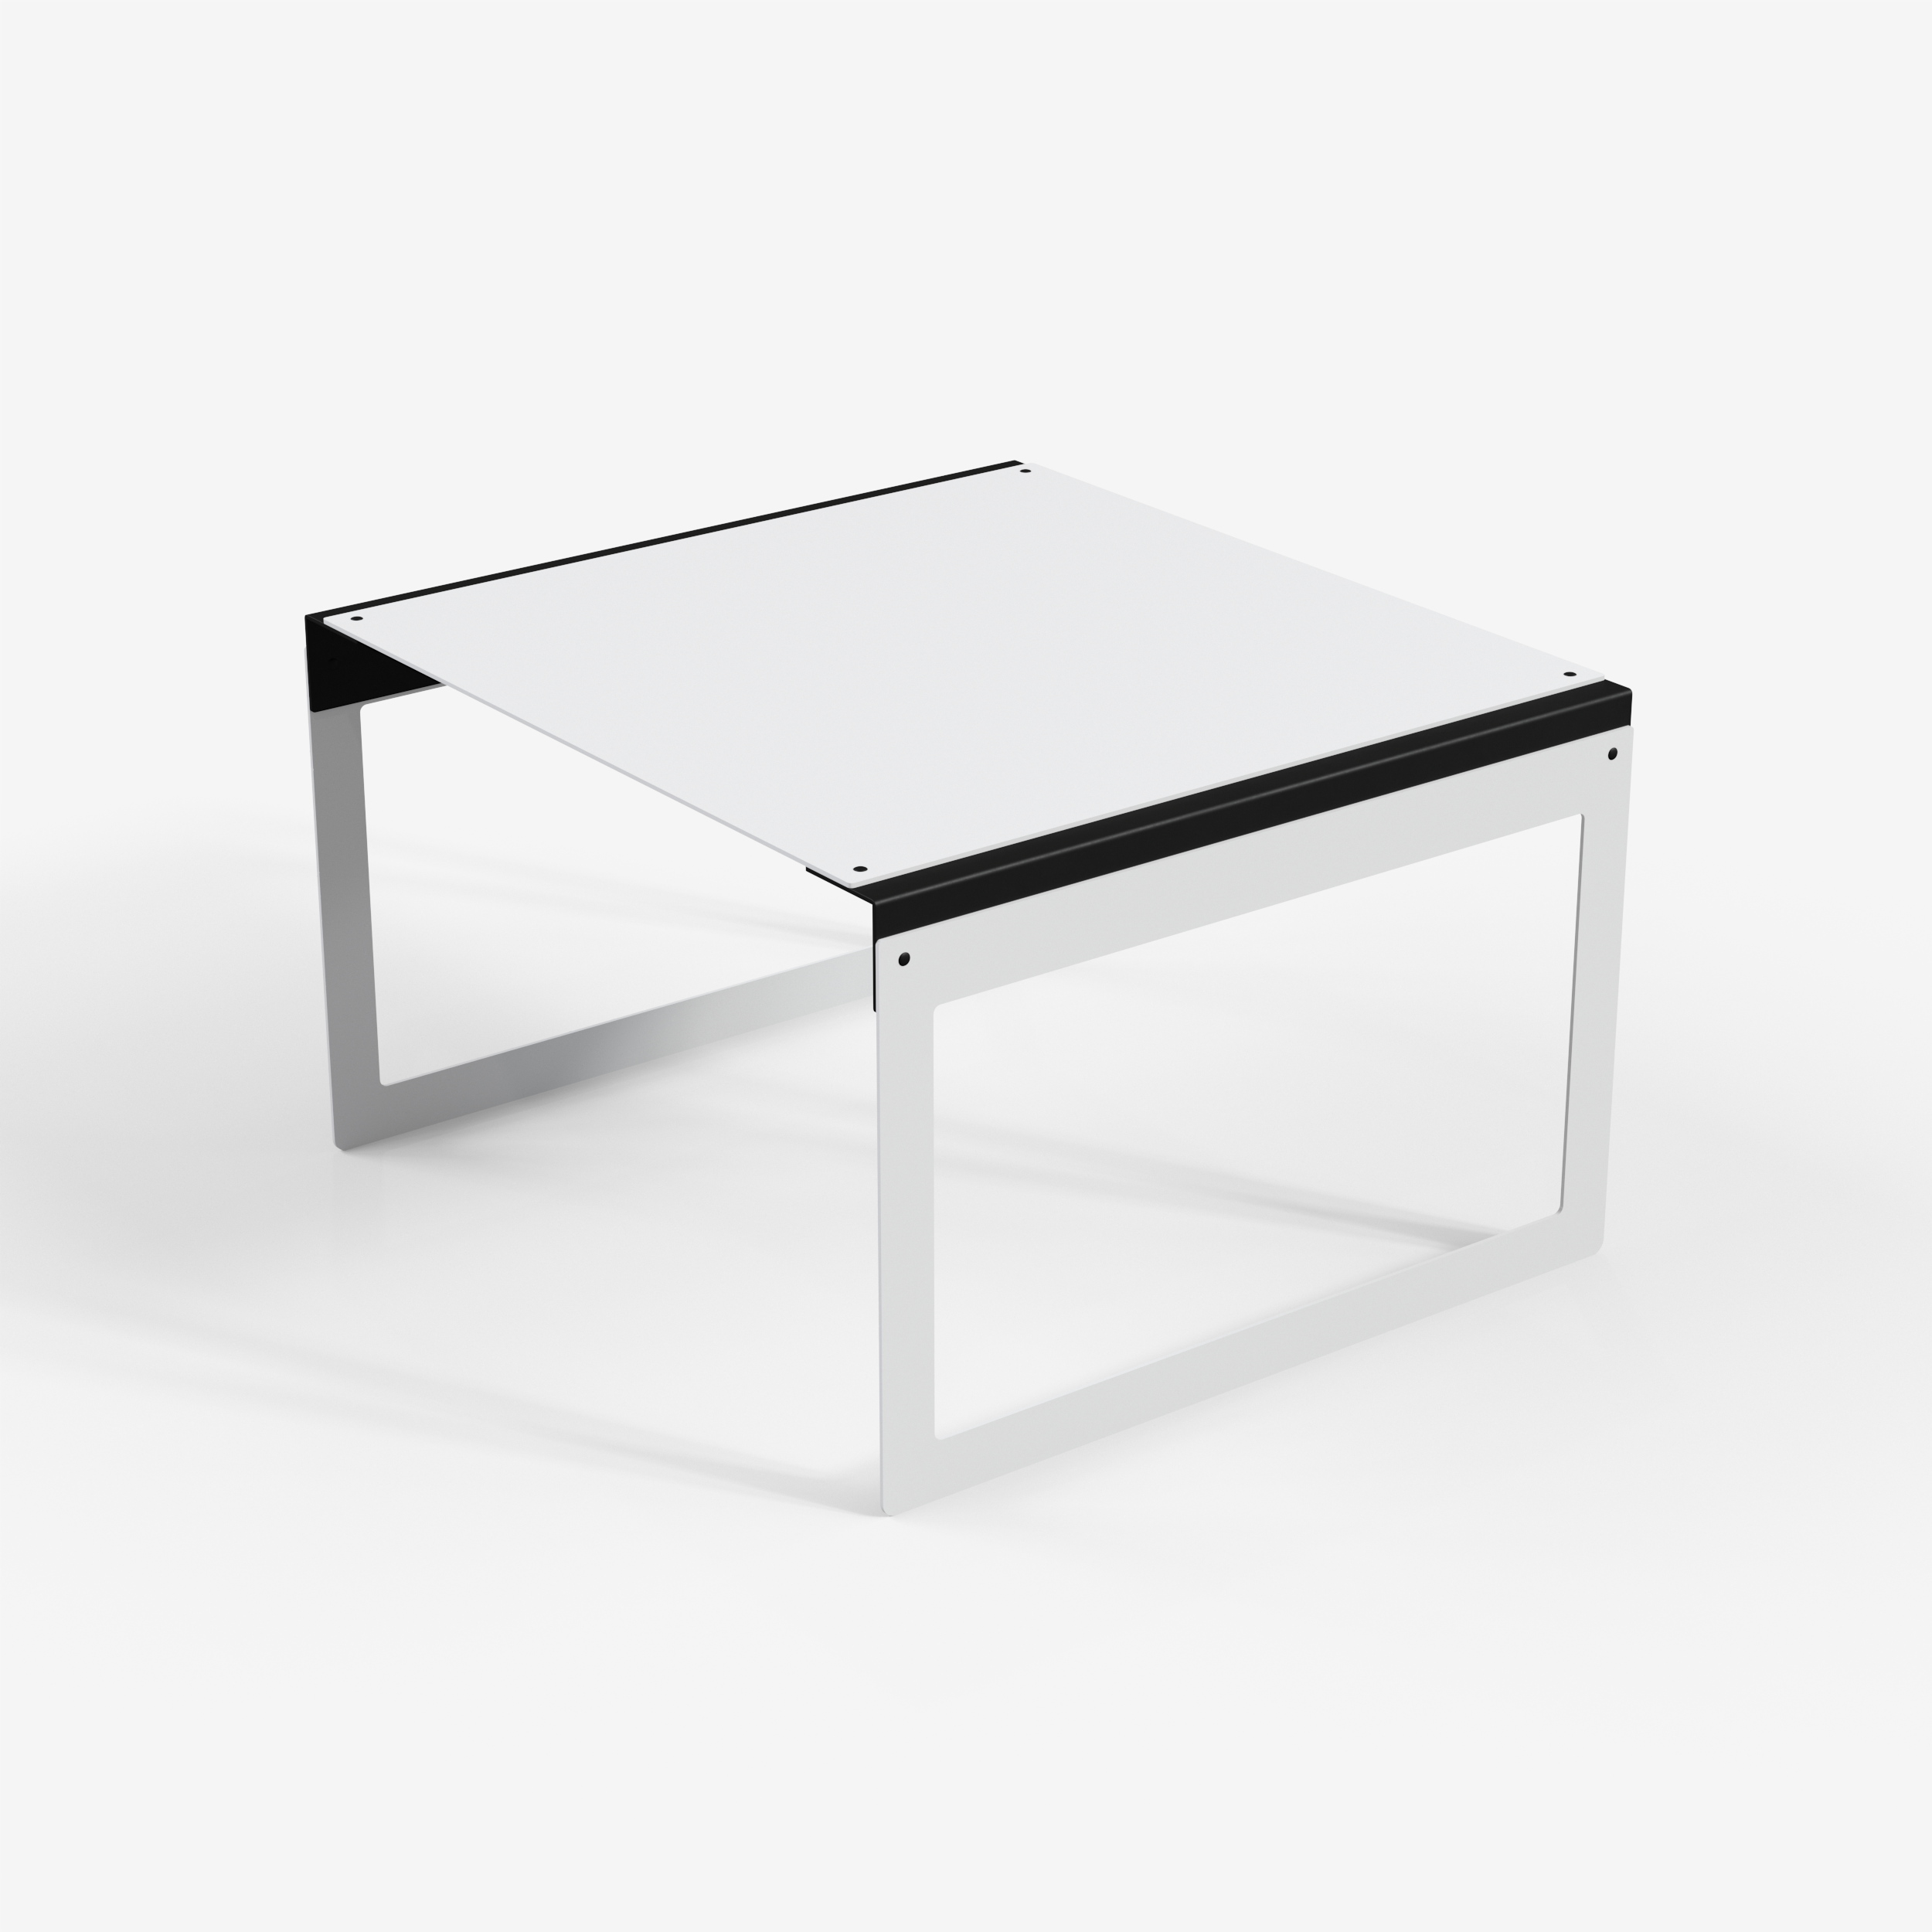 Connect - Coffee Table / XL (Frame, White)